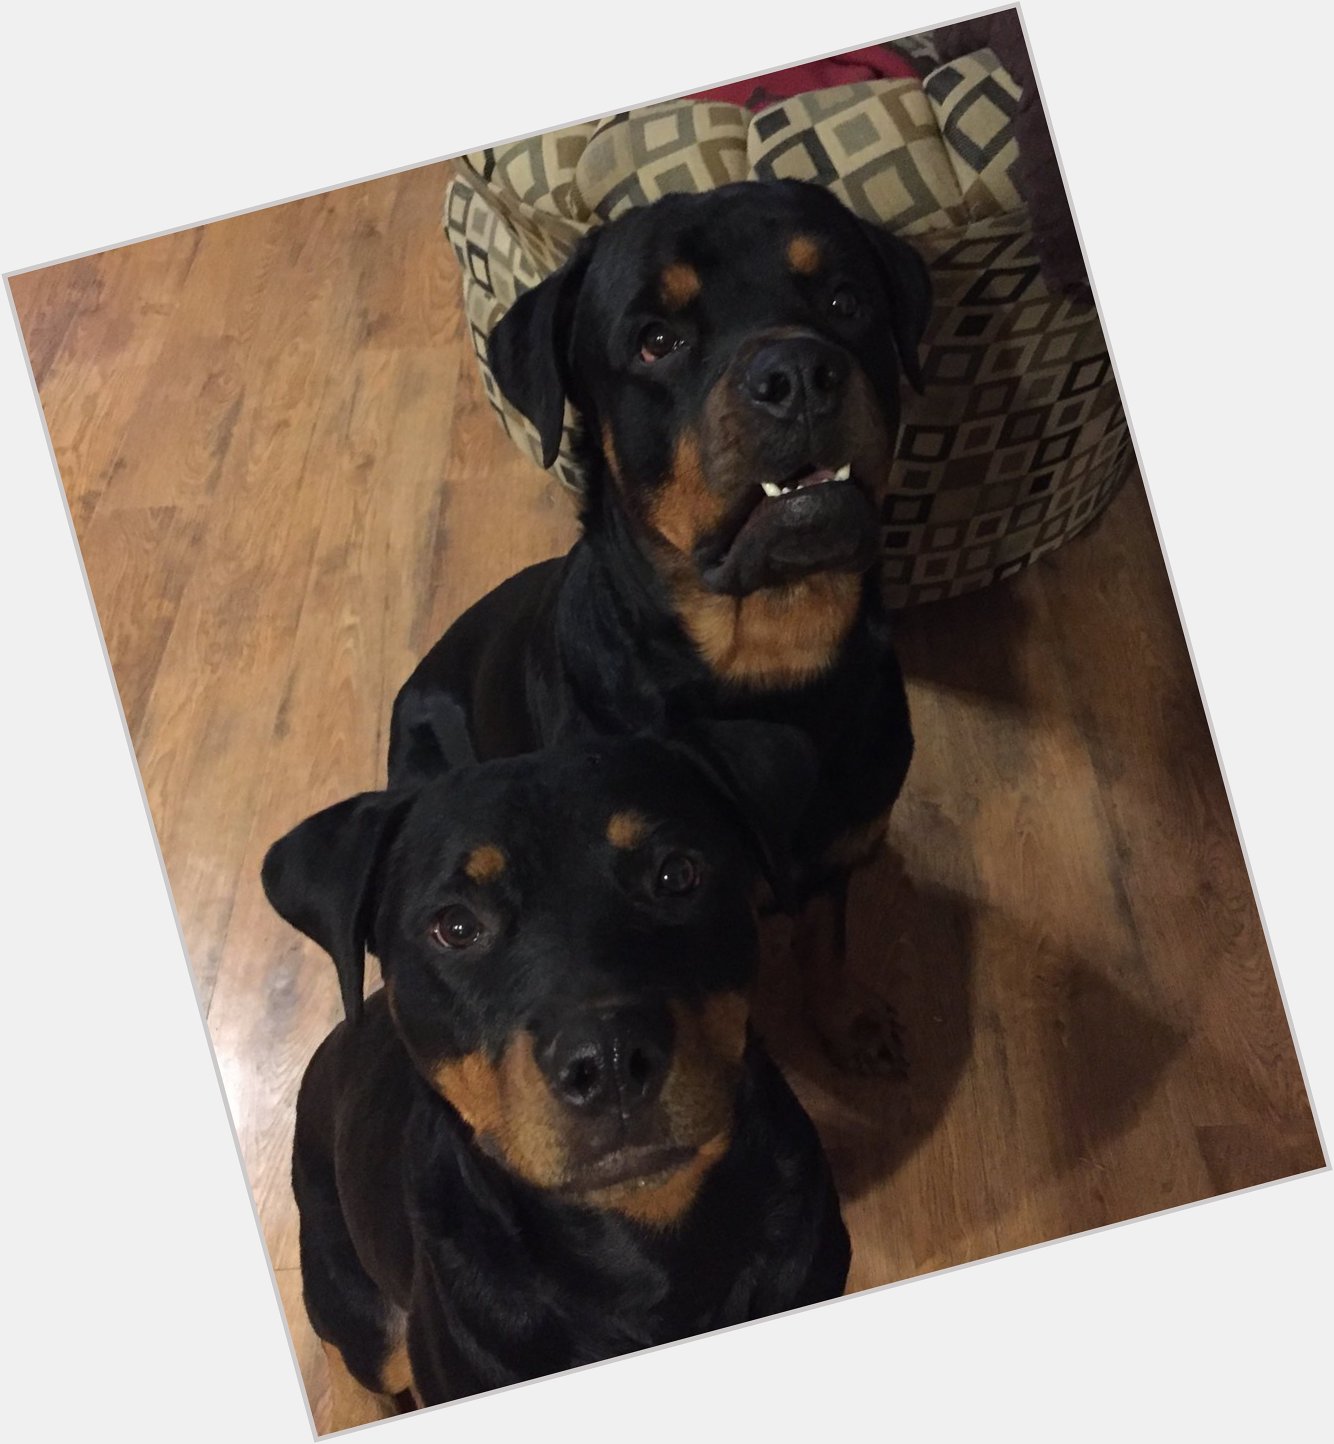   Happy birthday from my two Rottweilers!            